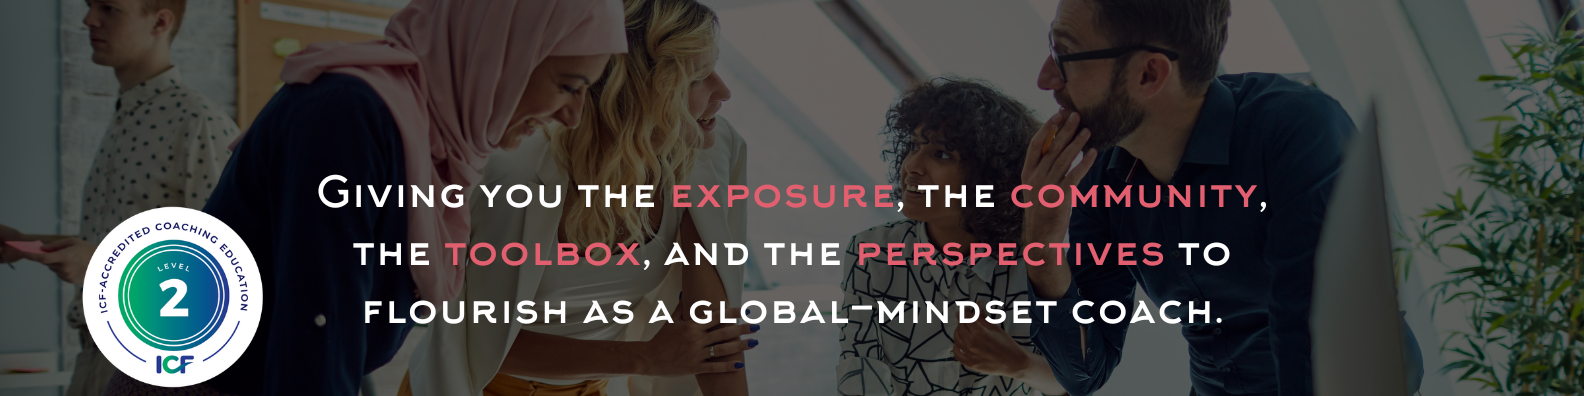 People coaching - Giving you the exposure, the community, the toolbox, and the perspectives to flourish as a global-mindset coach